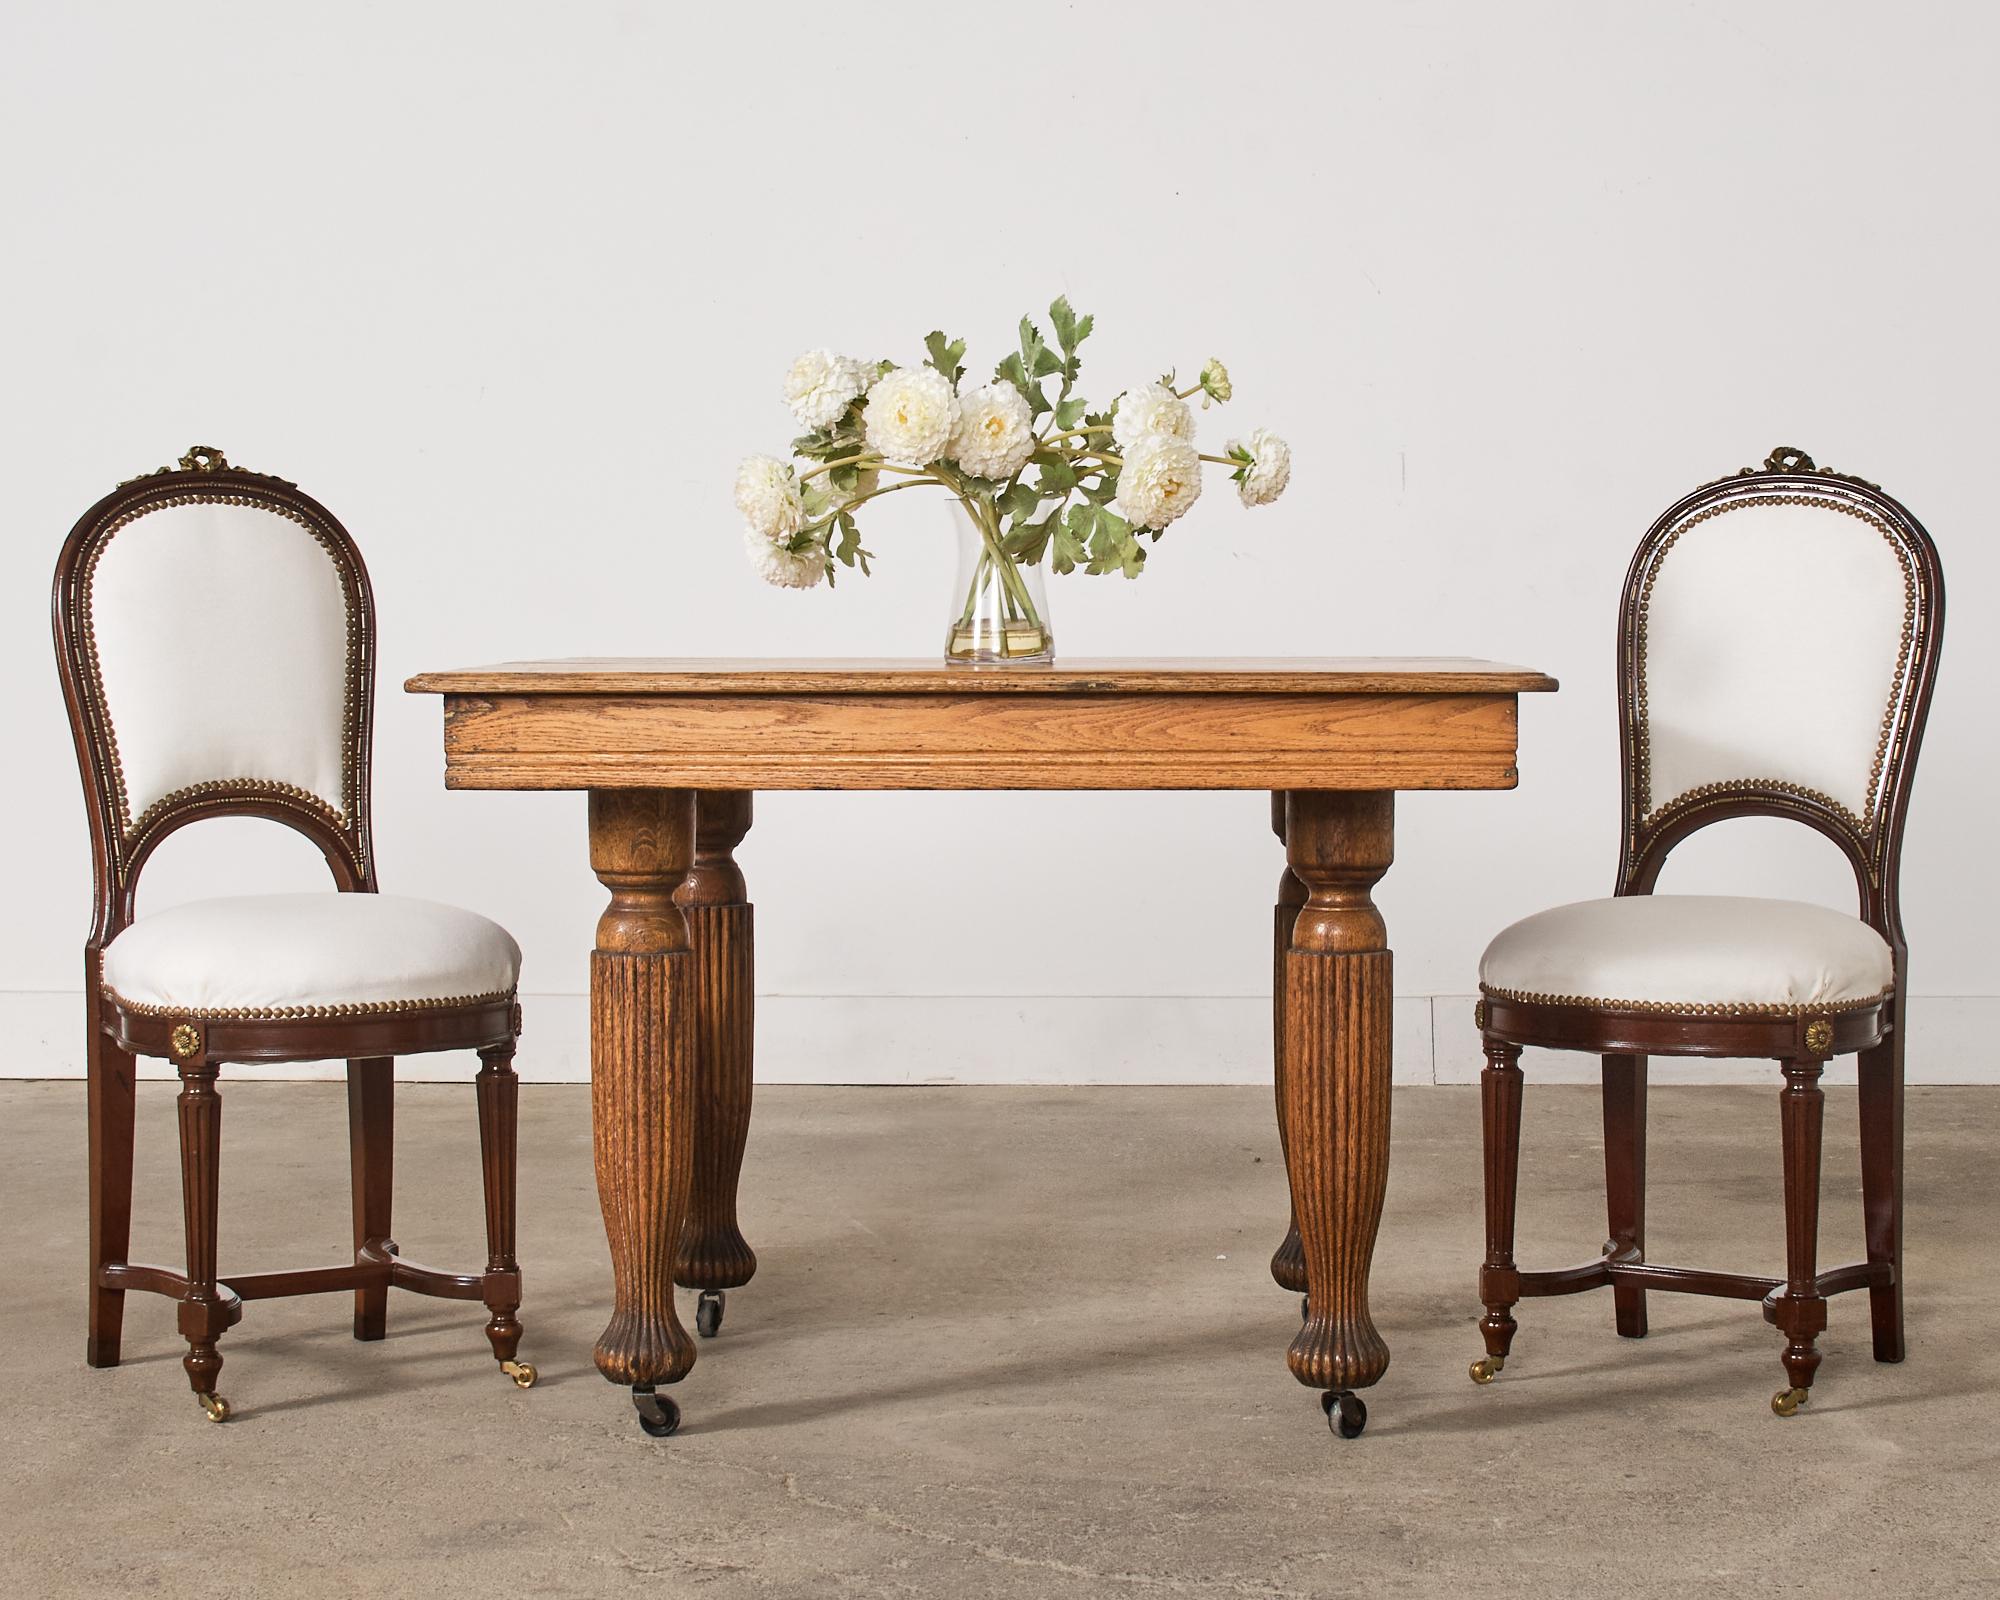 Handsome 19th century English victorian square dining table or center table crafted from oak. This extending dining table does not have any leaves available and was used as a display piece by artist Ira Yeager (American 1938-2022) in his Calistoga,